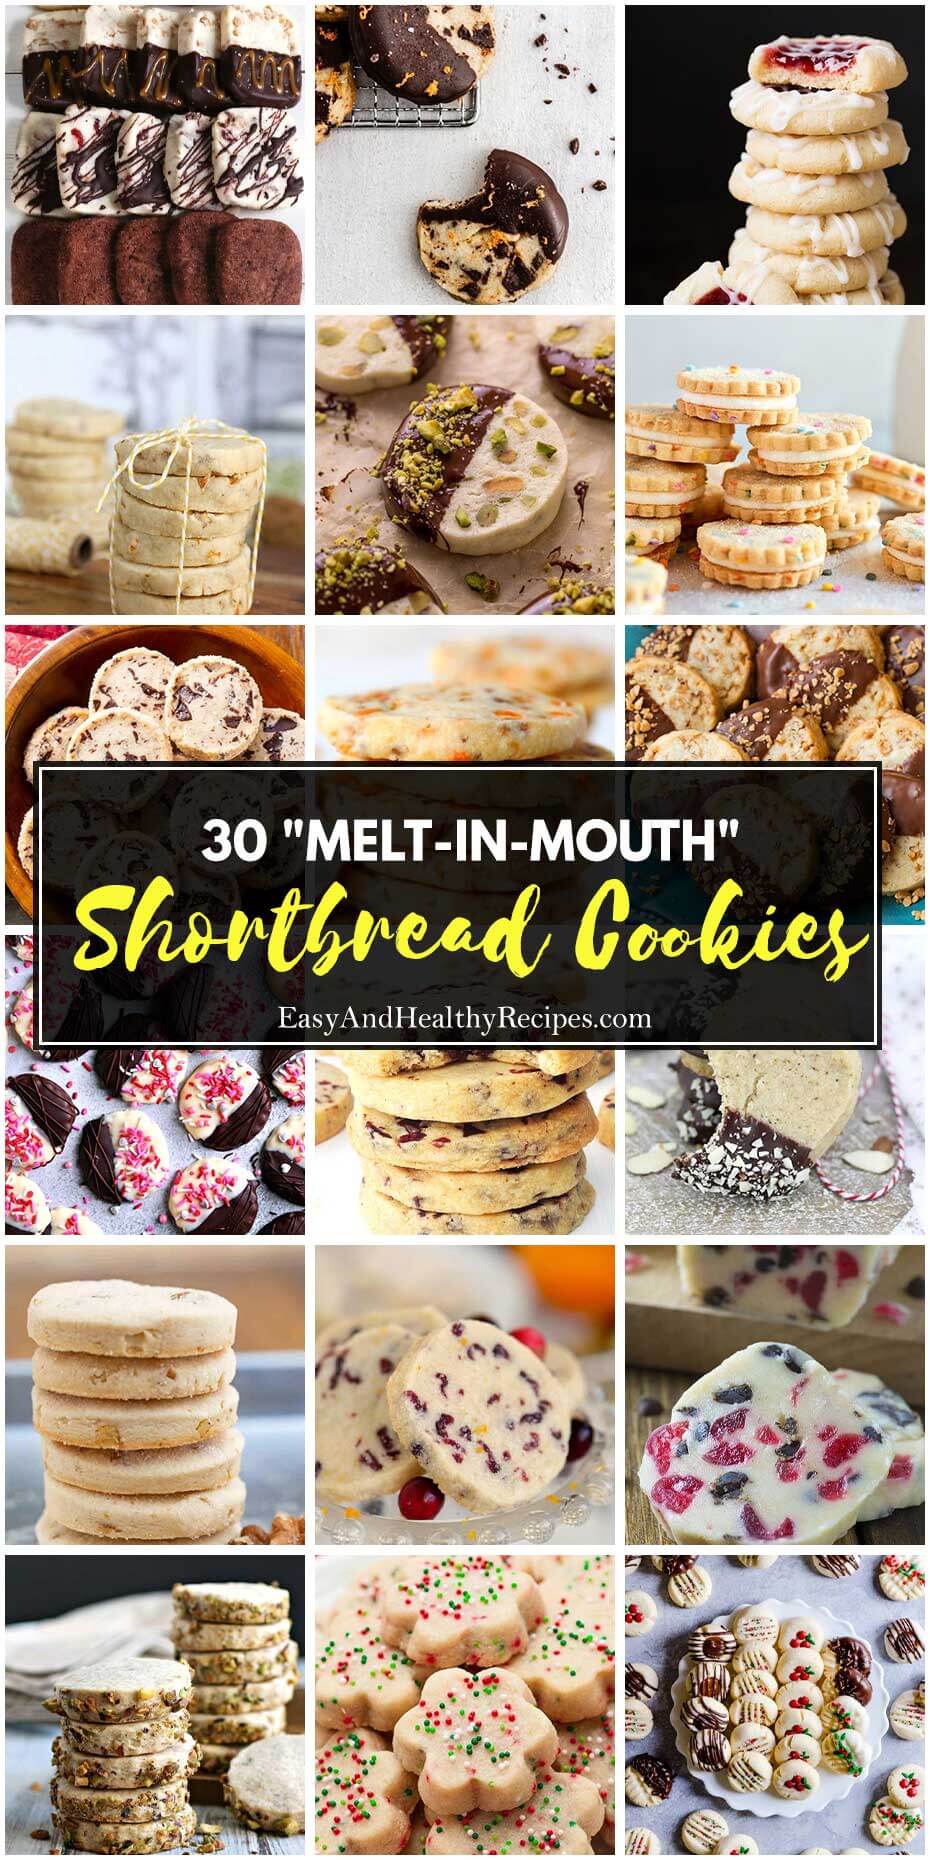 30 “Melt-In-Mouth” Shortbread Cookies